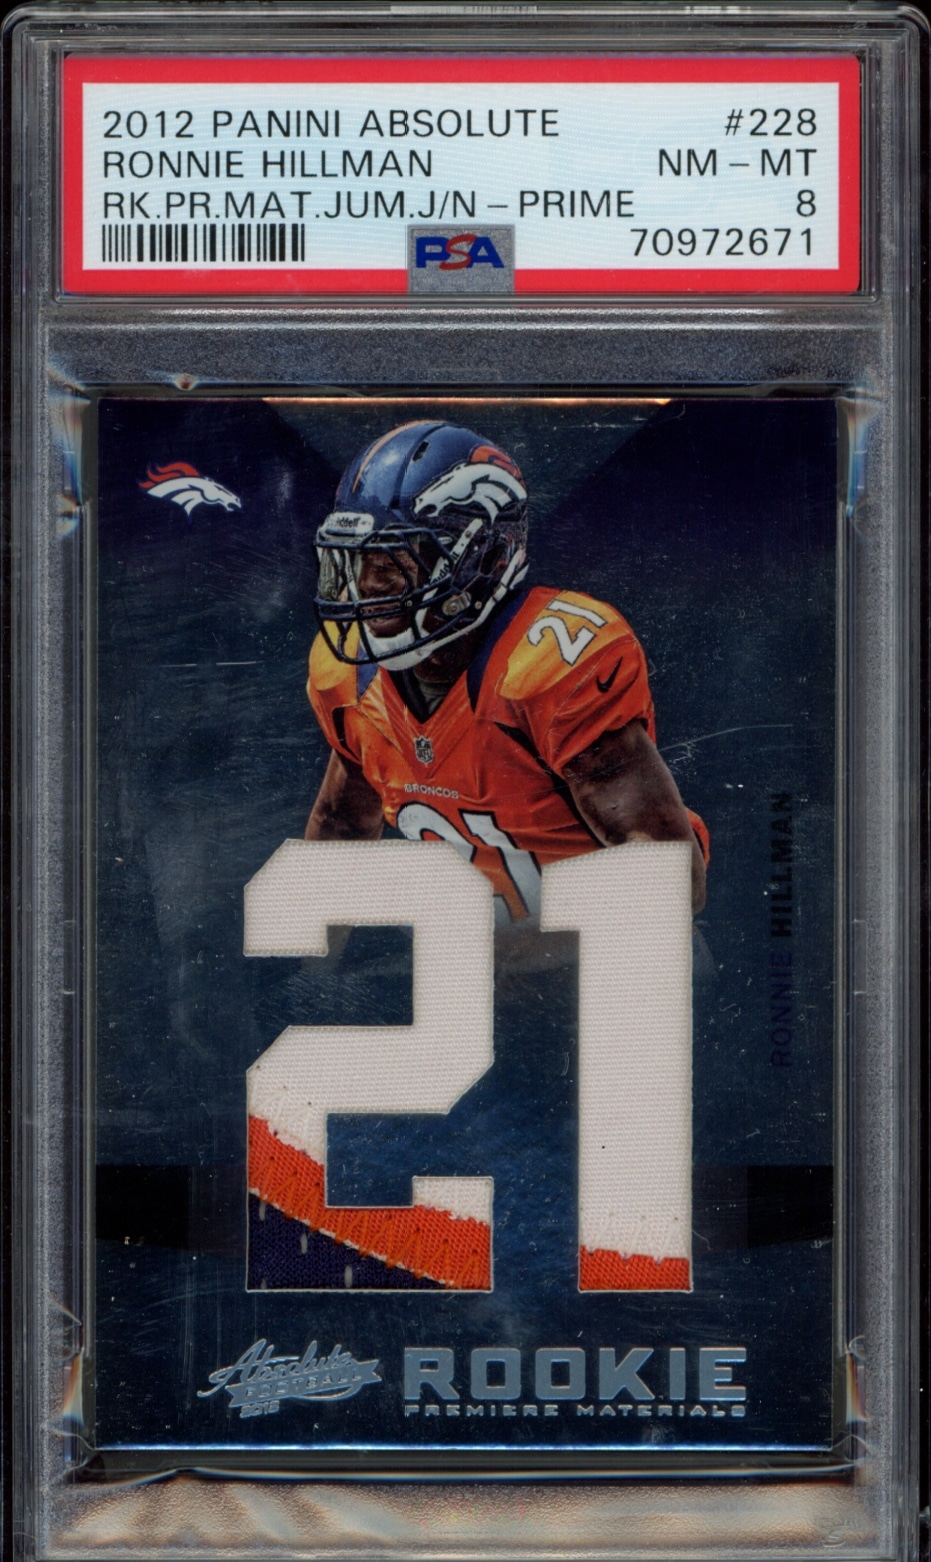 2012 Panini Absolute Ronnie Hillman Rookie Card #228, graded PSA 8, featuring team colors and logo.